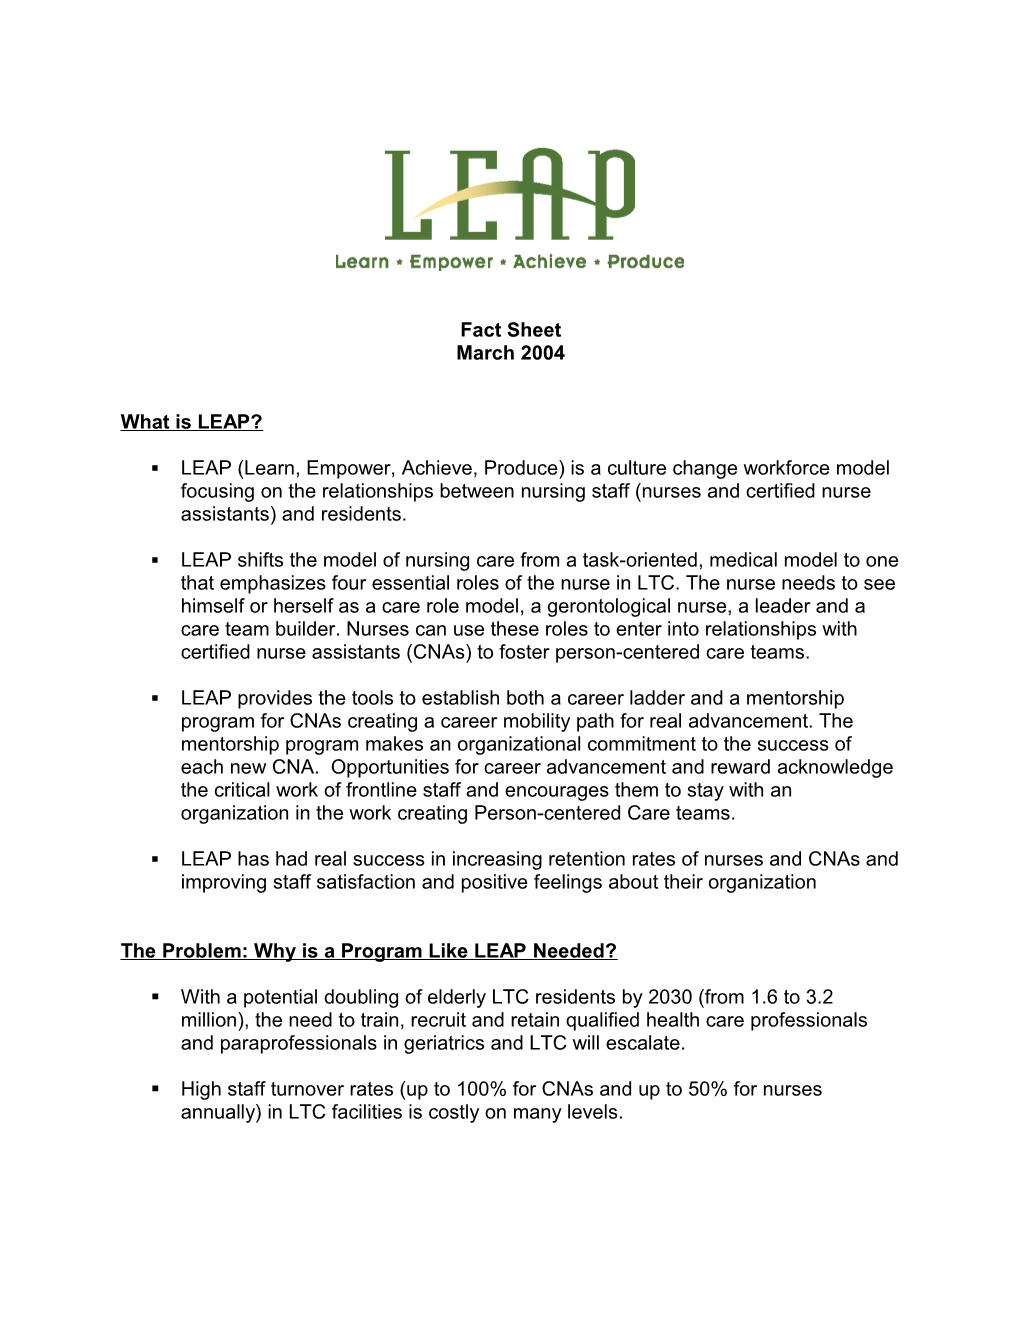 LEAP: Learn, Empower, Achieve, Produce